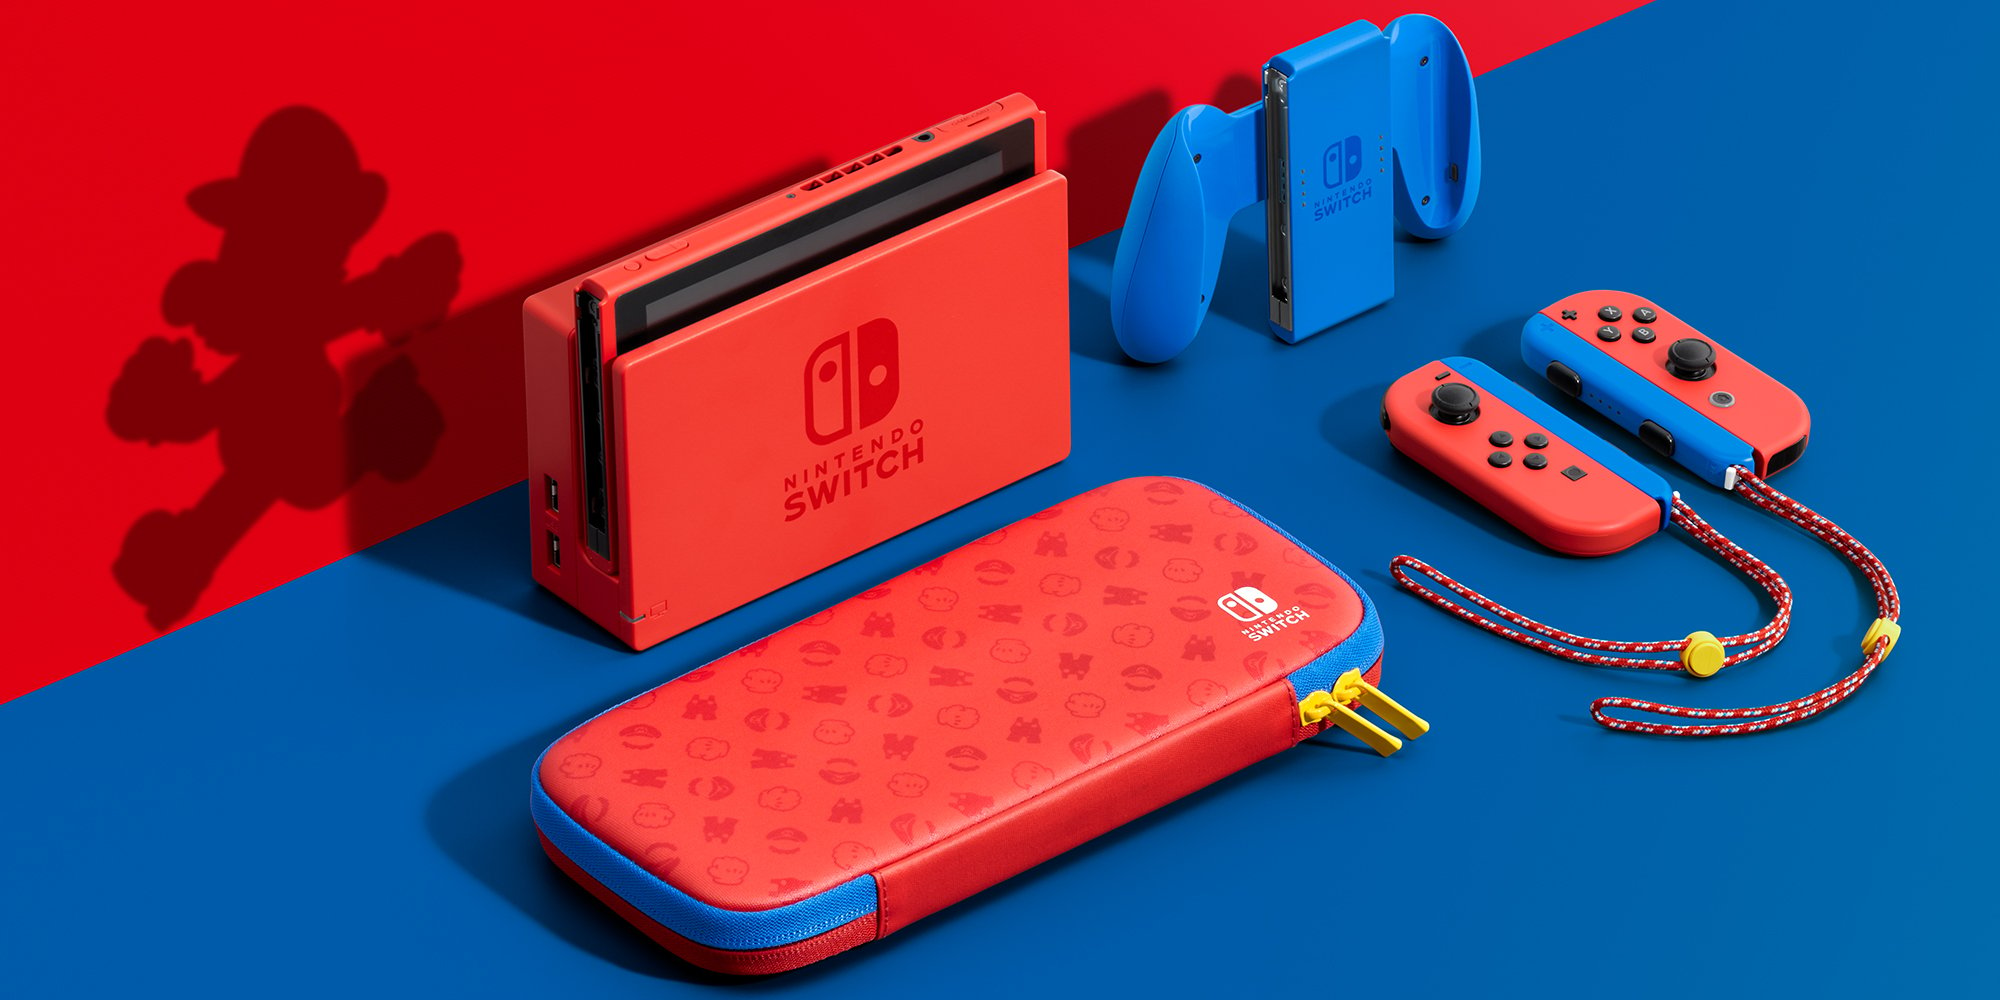 Nintendo's new Mario edition Switch is the console's first colour